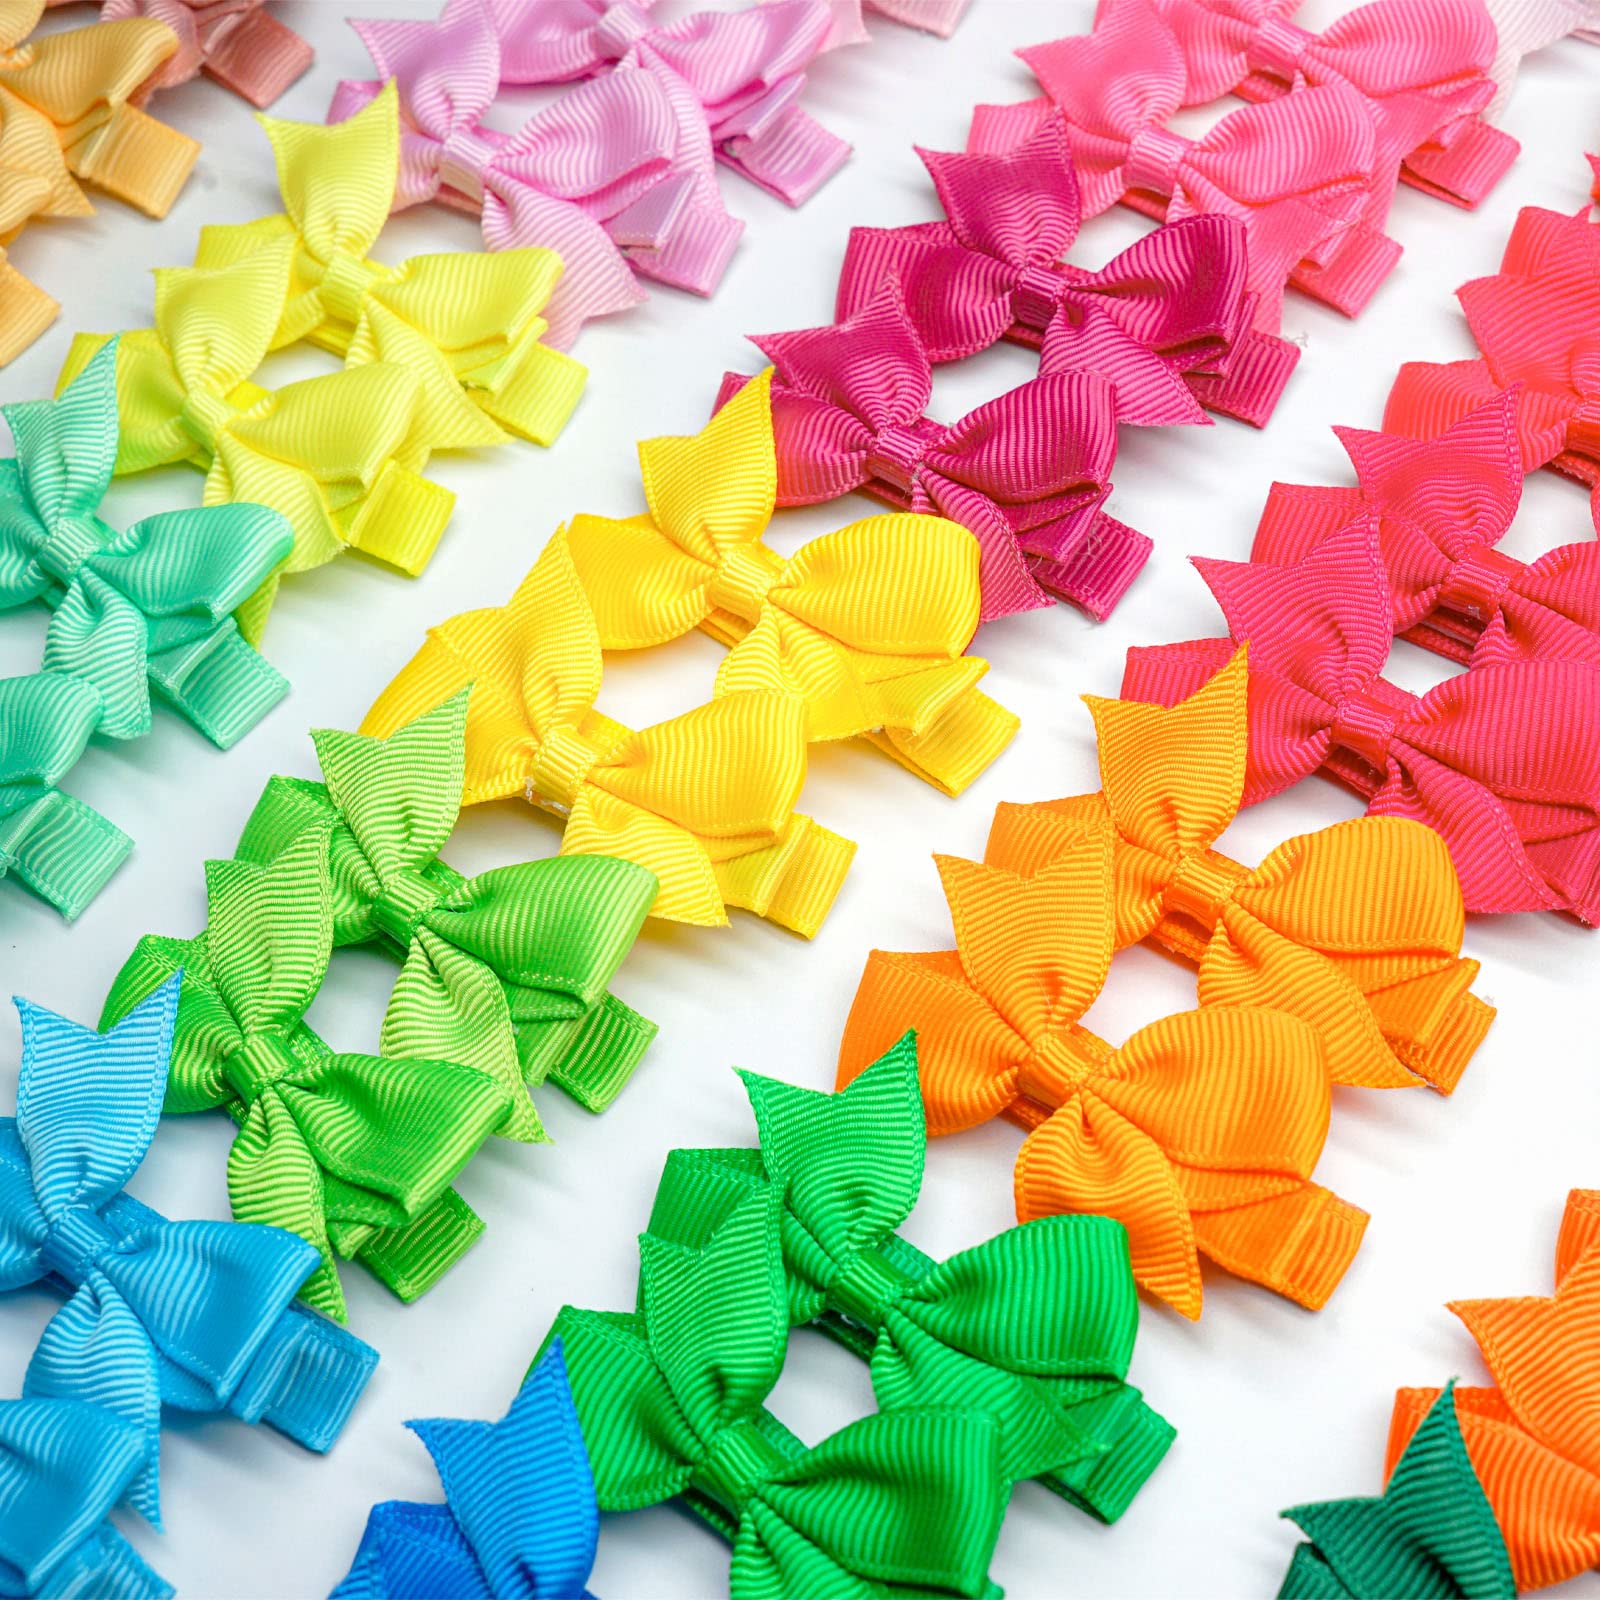 CLLOT CELLOT Baby Hair Clips 50Pcs Tiny 2" Hair Bows Fully Covered Barrettes Clips for Baby Girls Infants and Toddlers,25 Colors in Pa